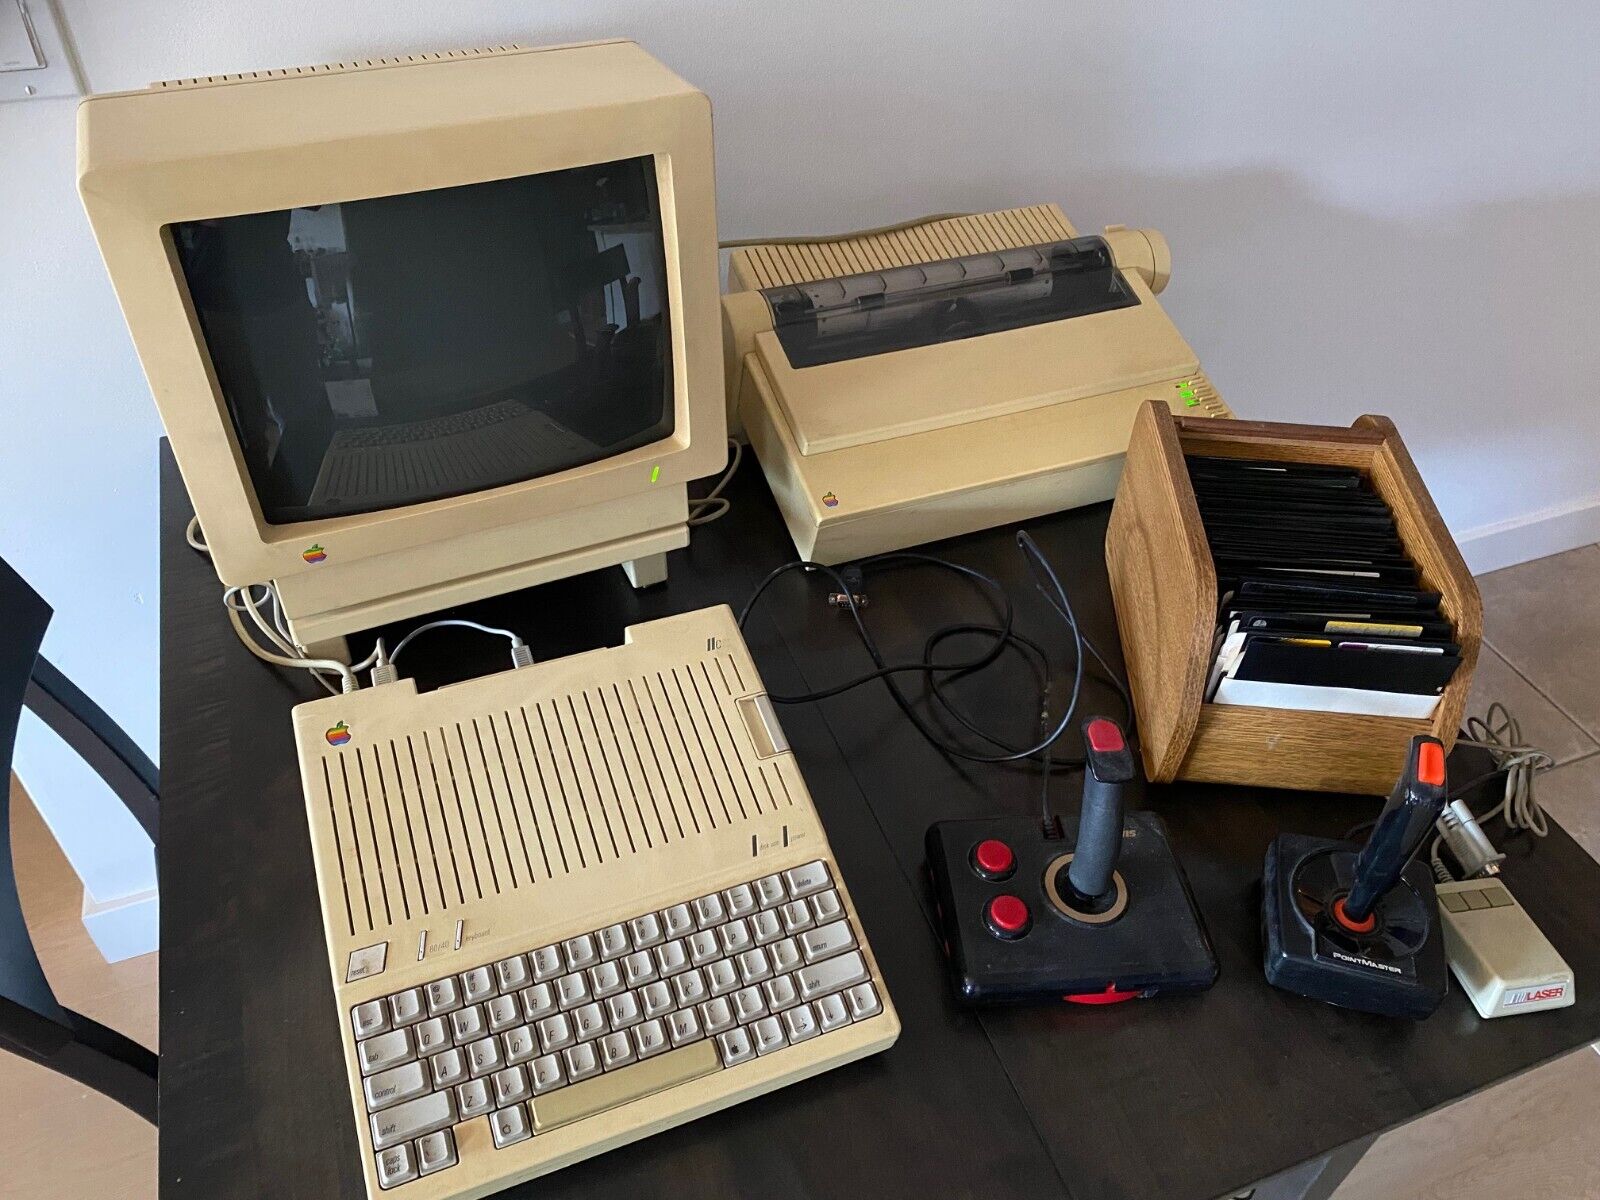 Vintage Apple IIc Computer with Monitor, Stand, Mouse, ImageWriter II, and more